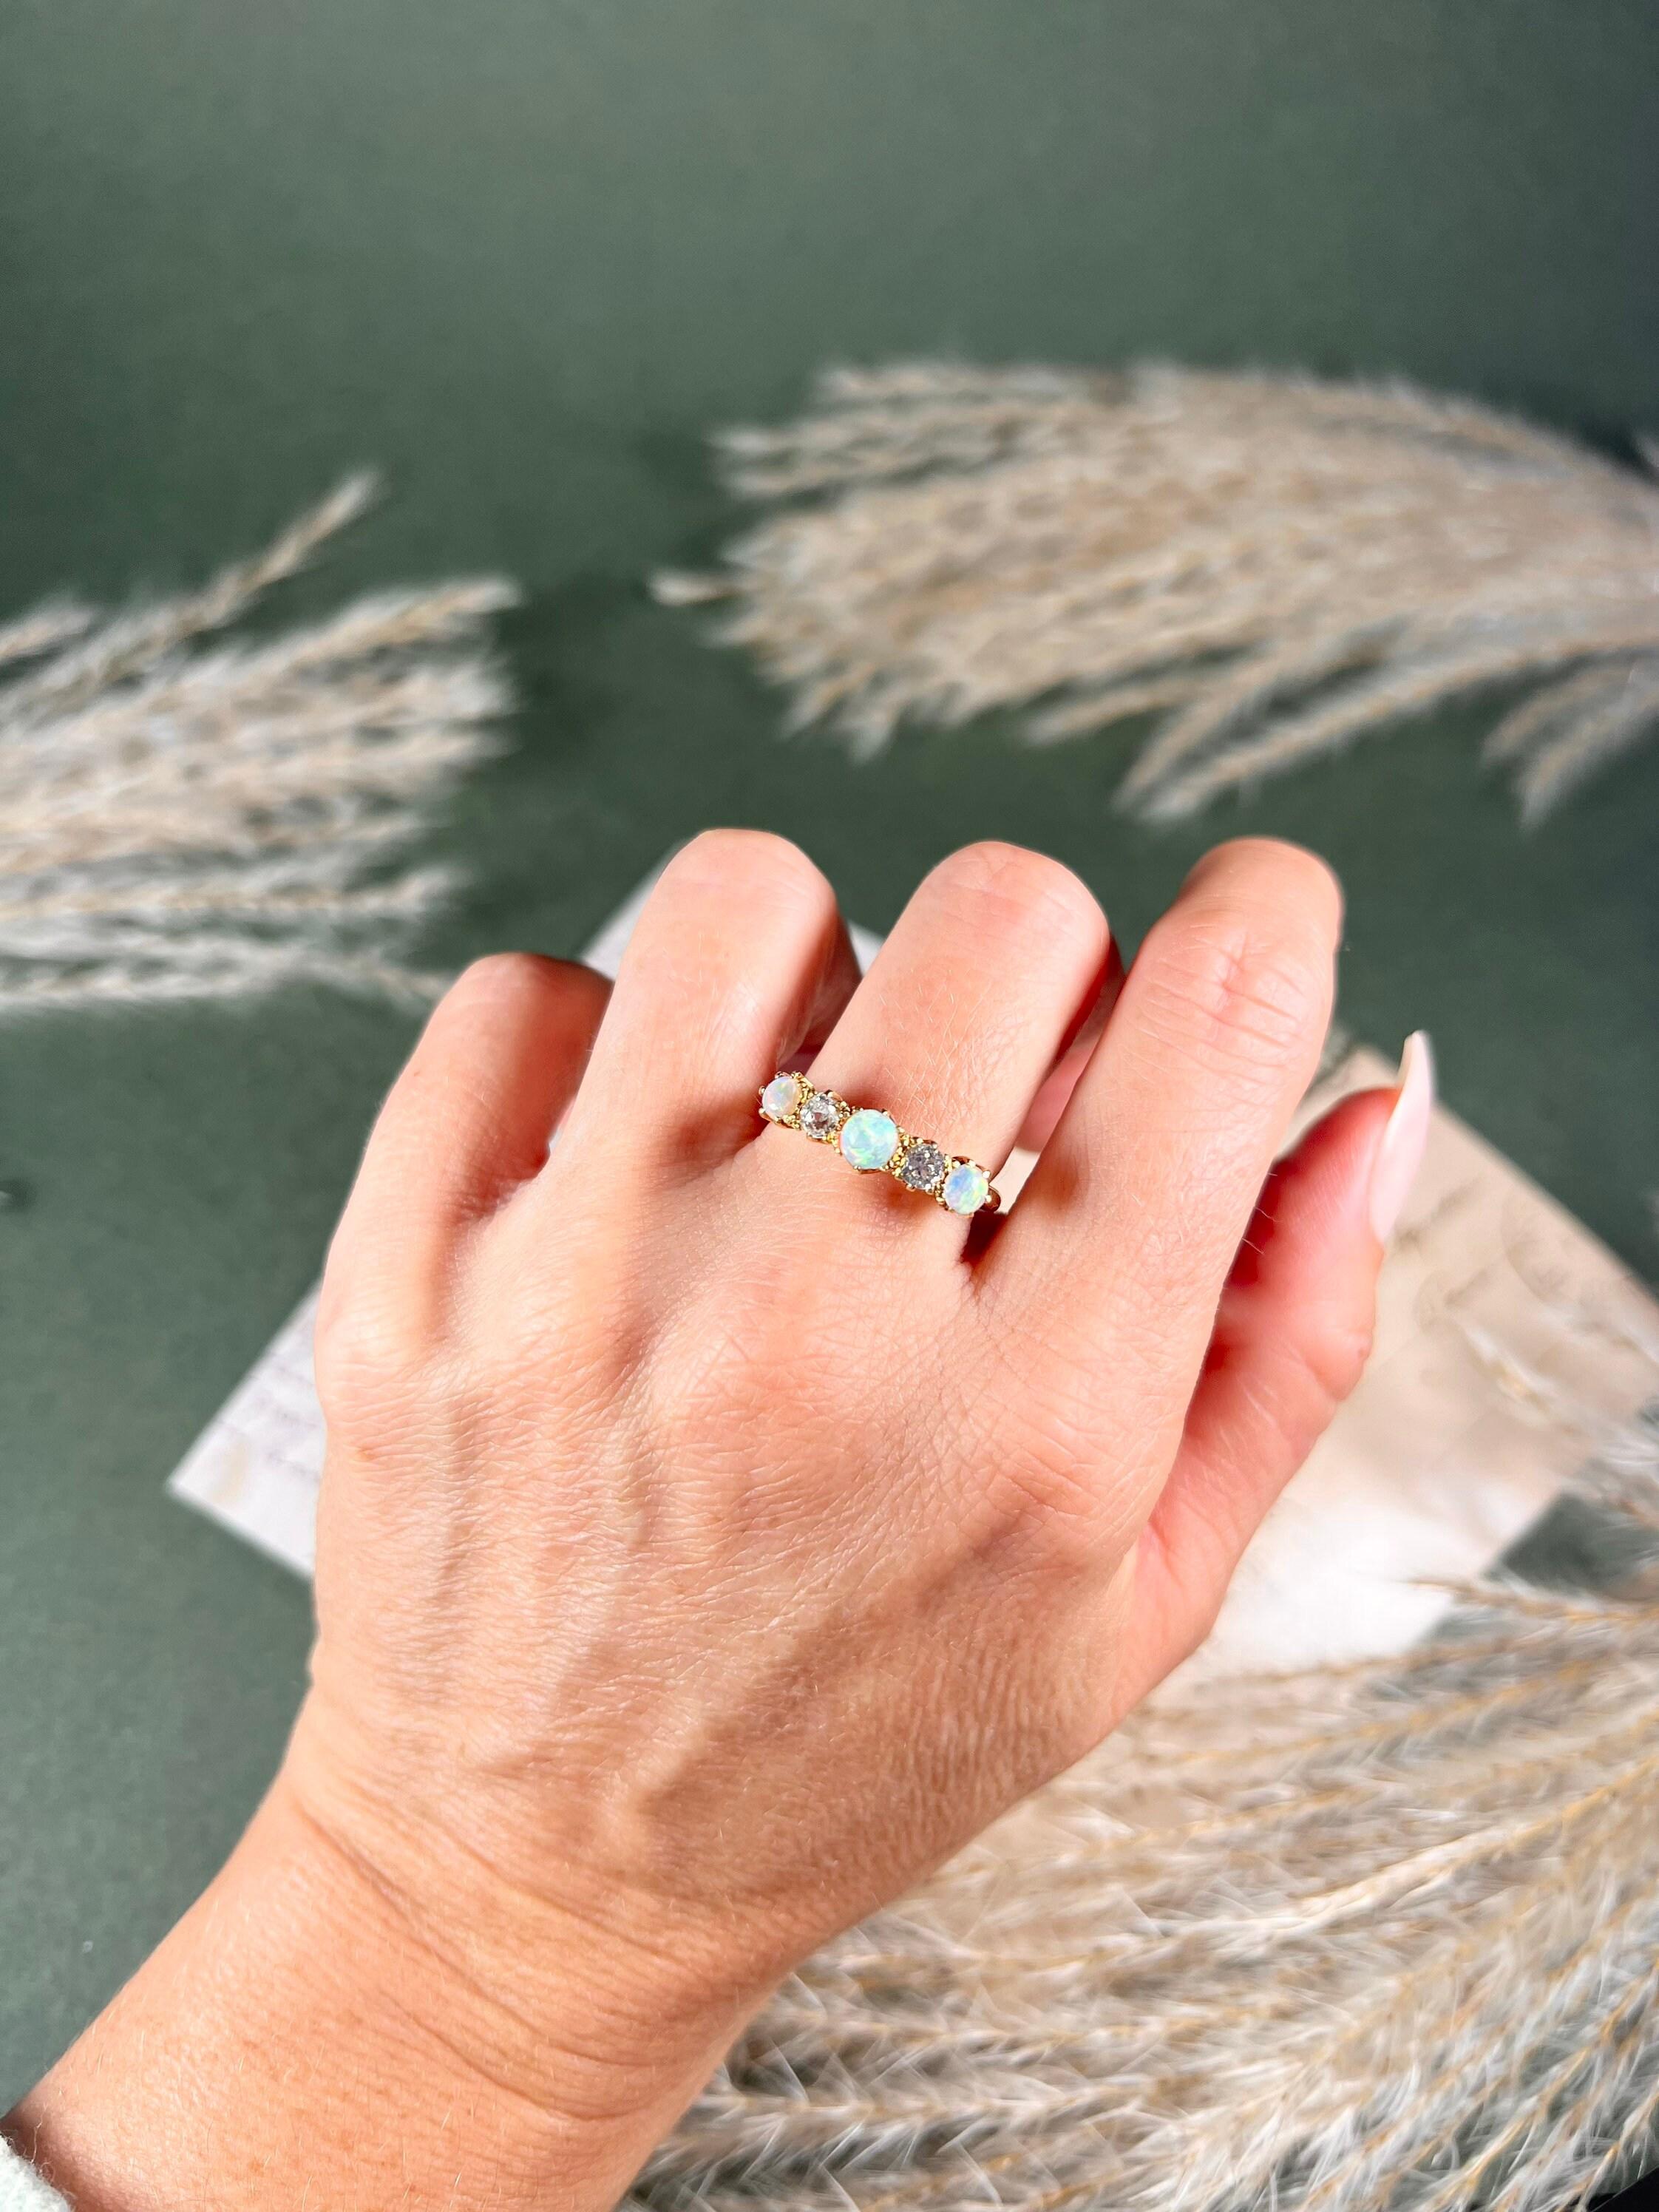 Antique Opal & Diamond Ring 

18ct Gold 

Circa 1890

Gorgeous, Victorian five stone ring. Set with beautiful round fiery opals & old cut diamonds. 
A super pretty ring for your collection. 

Measures approx height 5.5mm & width 20mm

UK Size Q